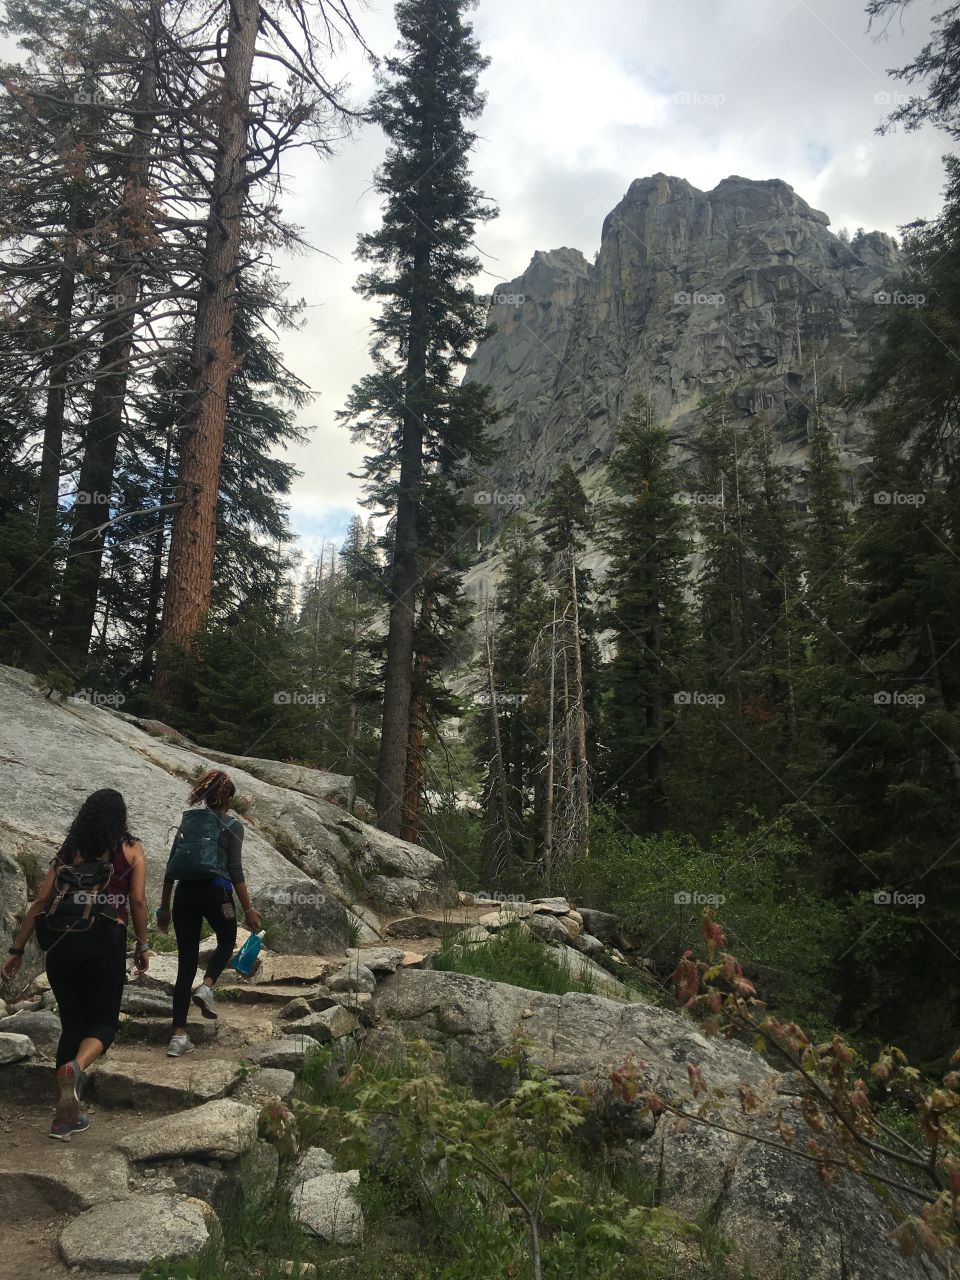 Hiking to the waterfall is sequoia national park California USA 